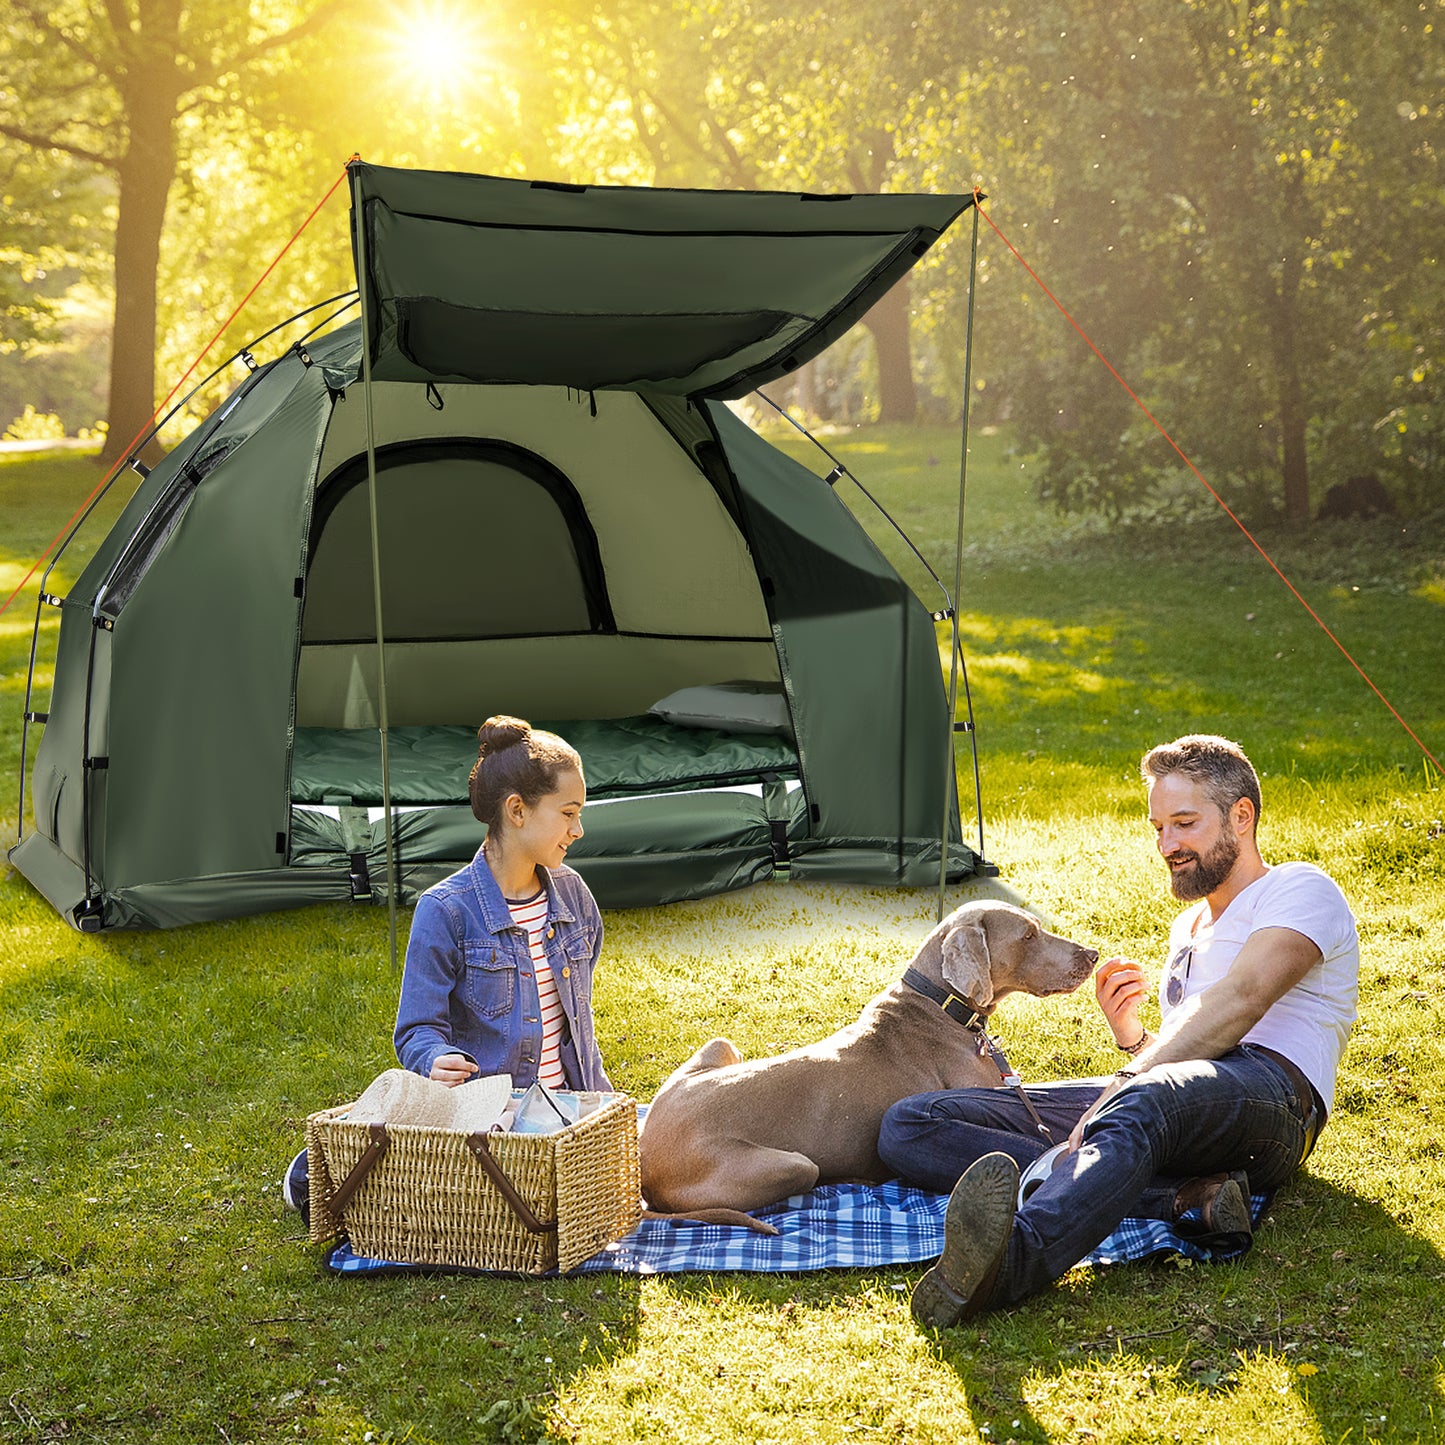 1-Person Folding Camping Tent with Sunshade and Air Mattress